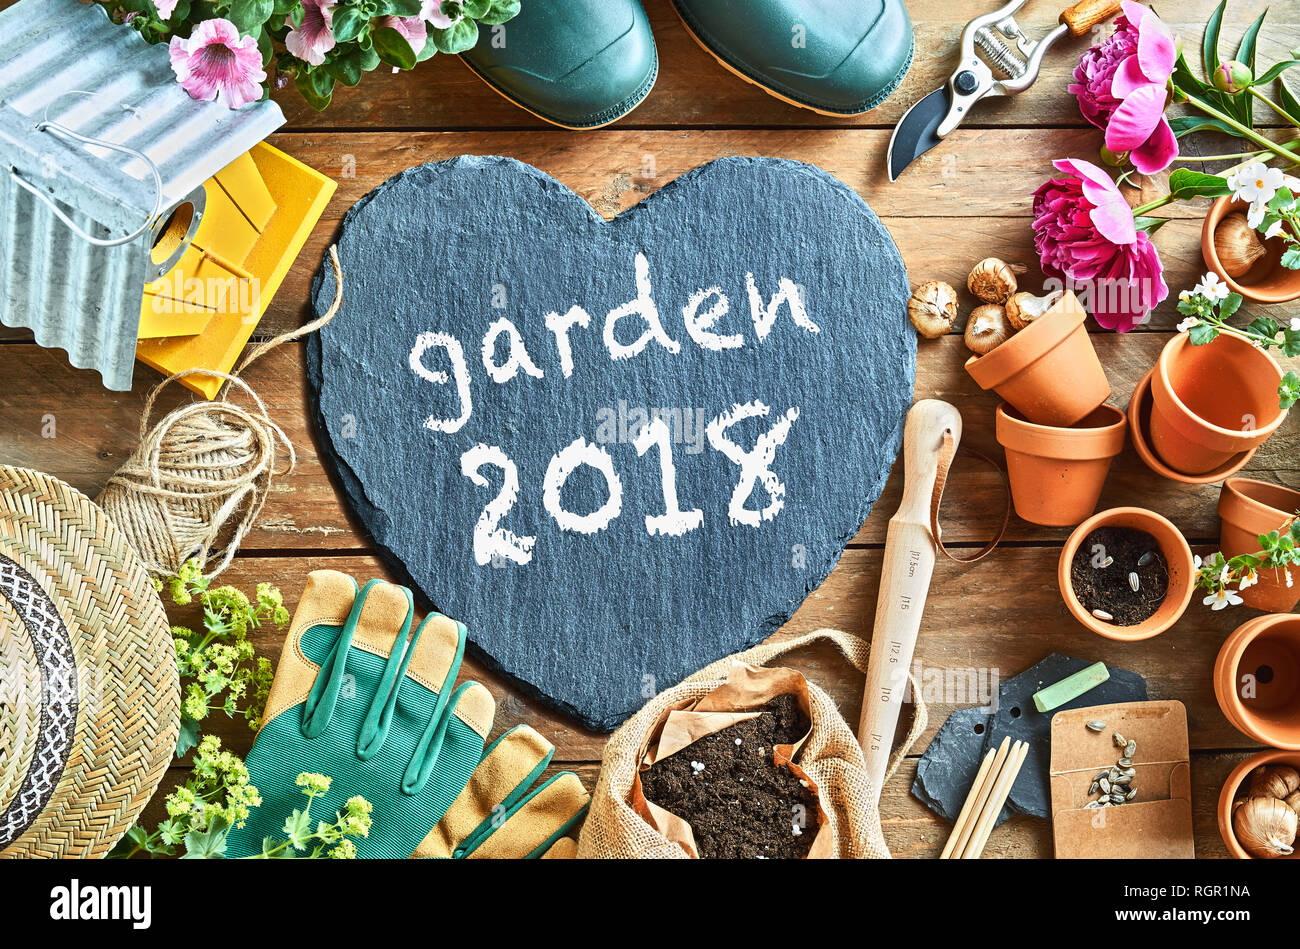 Garden season 2018 concept overhead photo of gardening equipment arranged on the floor, with grey heart-shaped board with white inscription Stock Photo